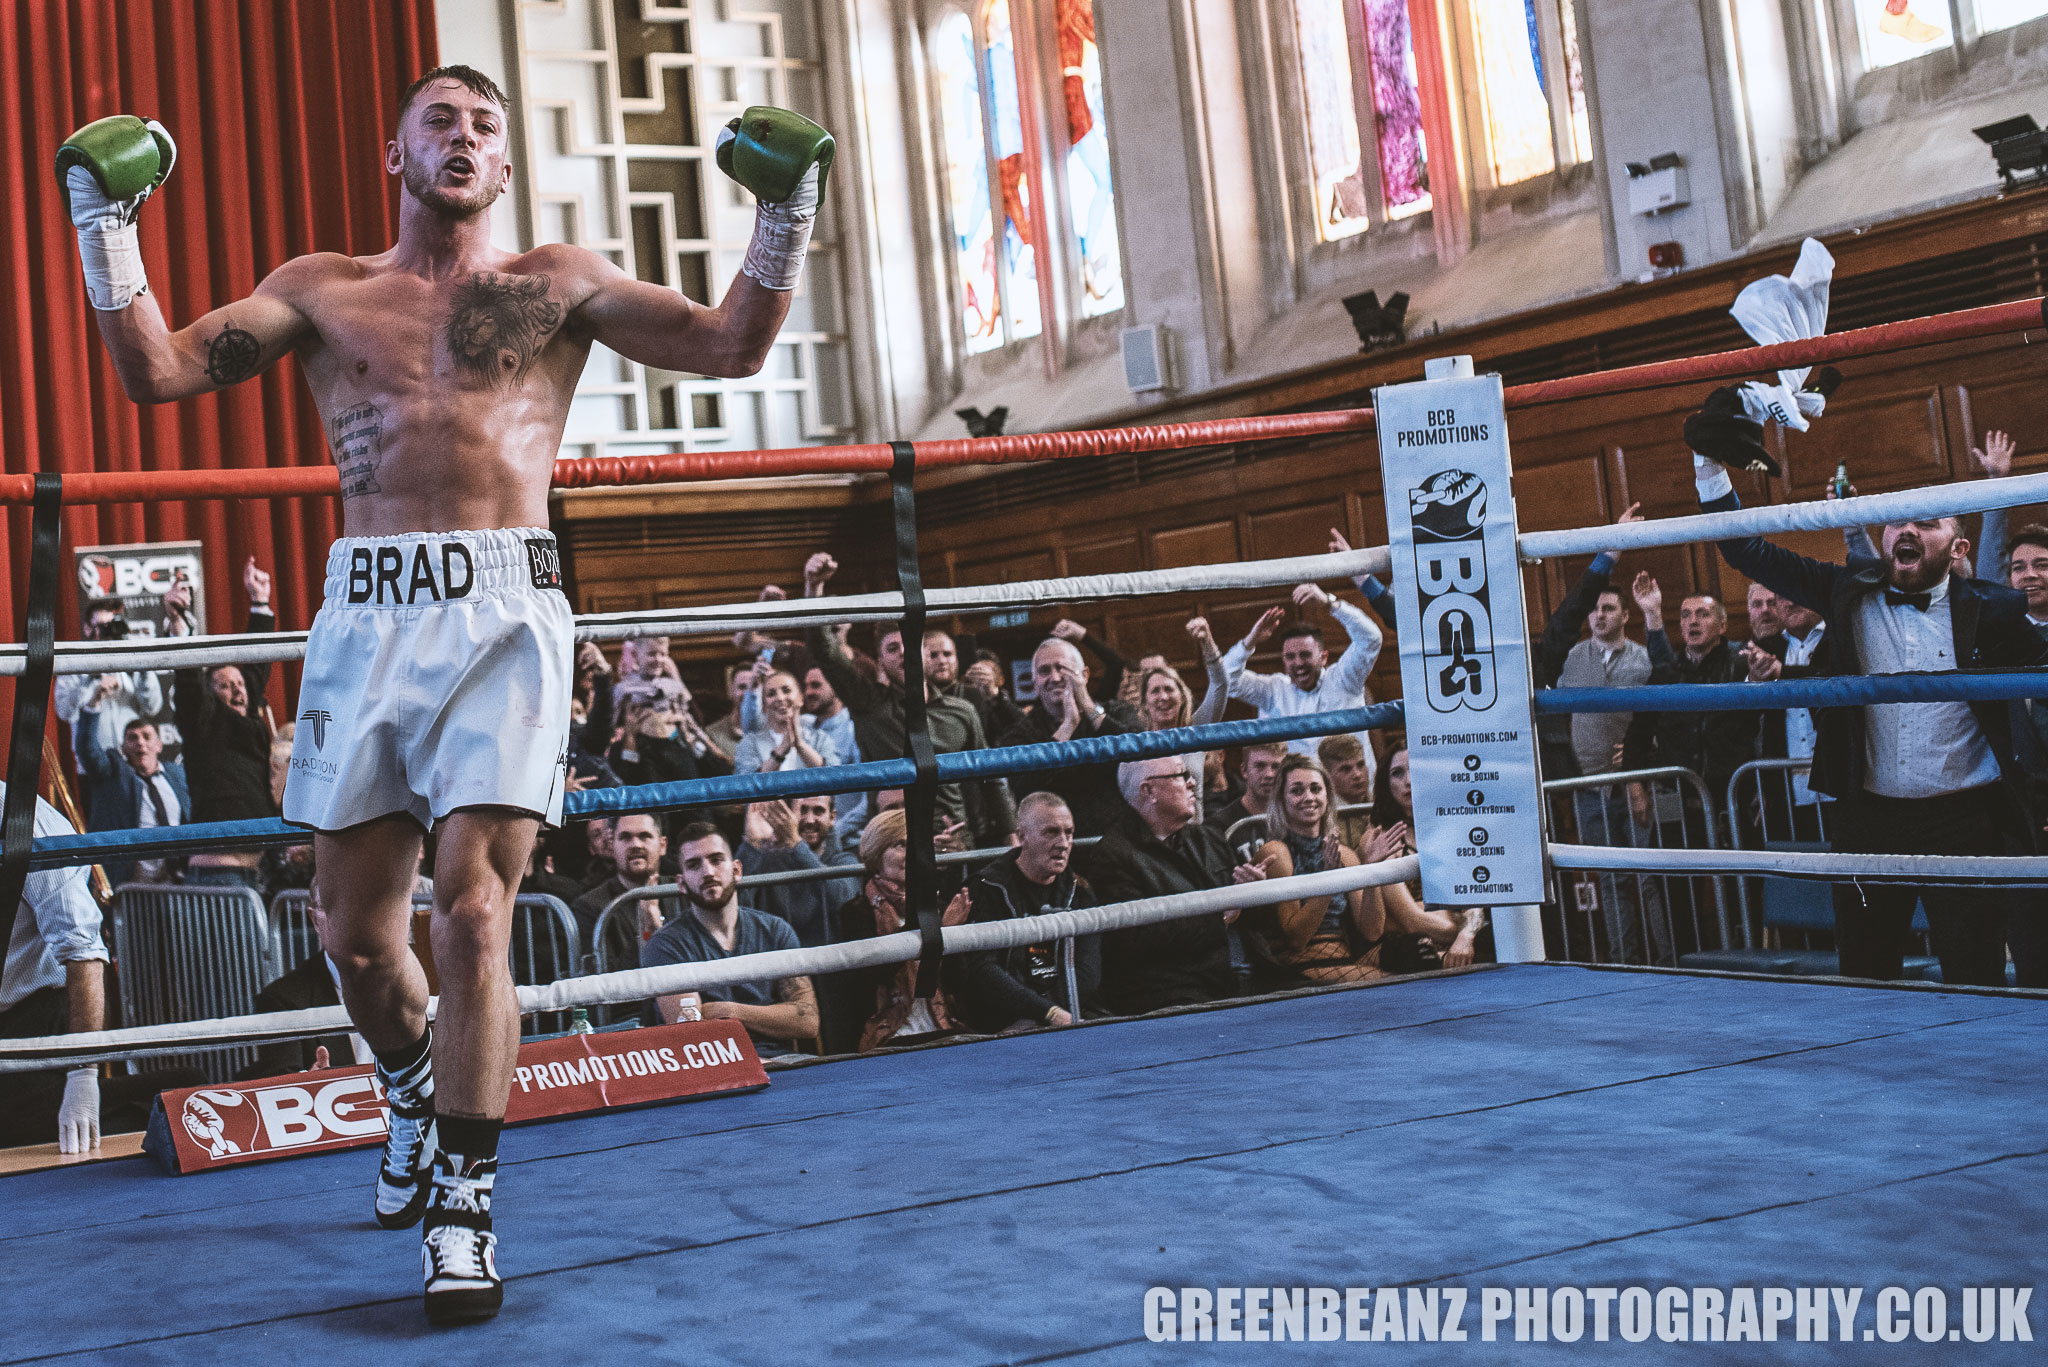 Brad Pauls demolishes his opponent in style during Fireworks at the Hall